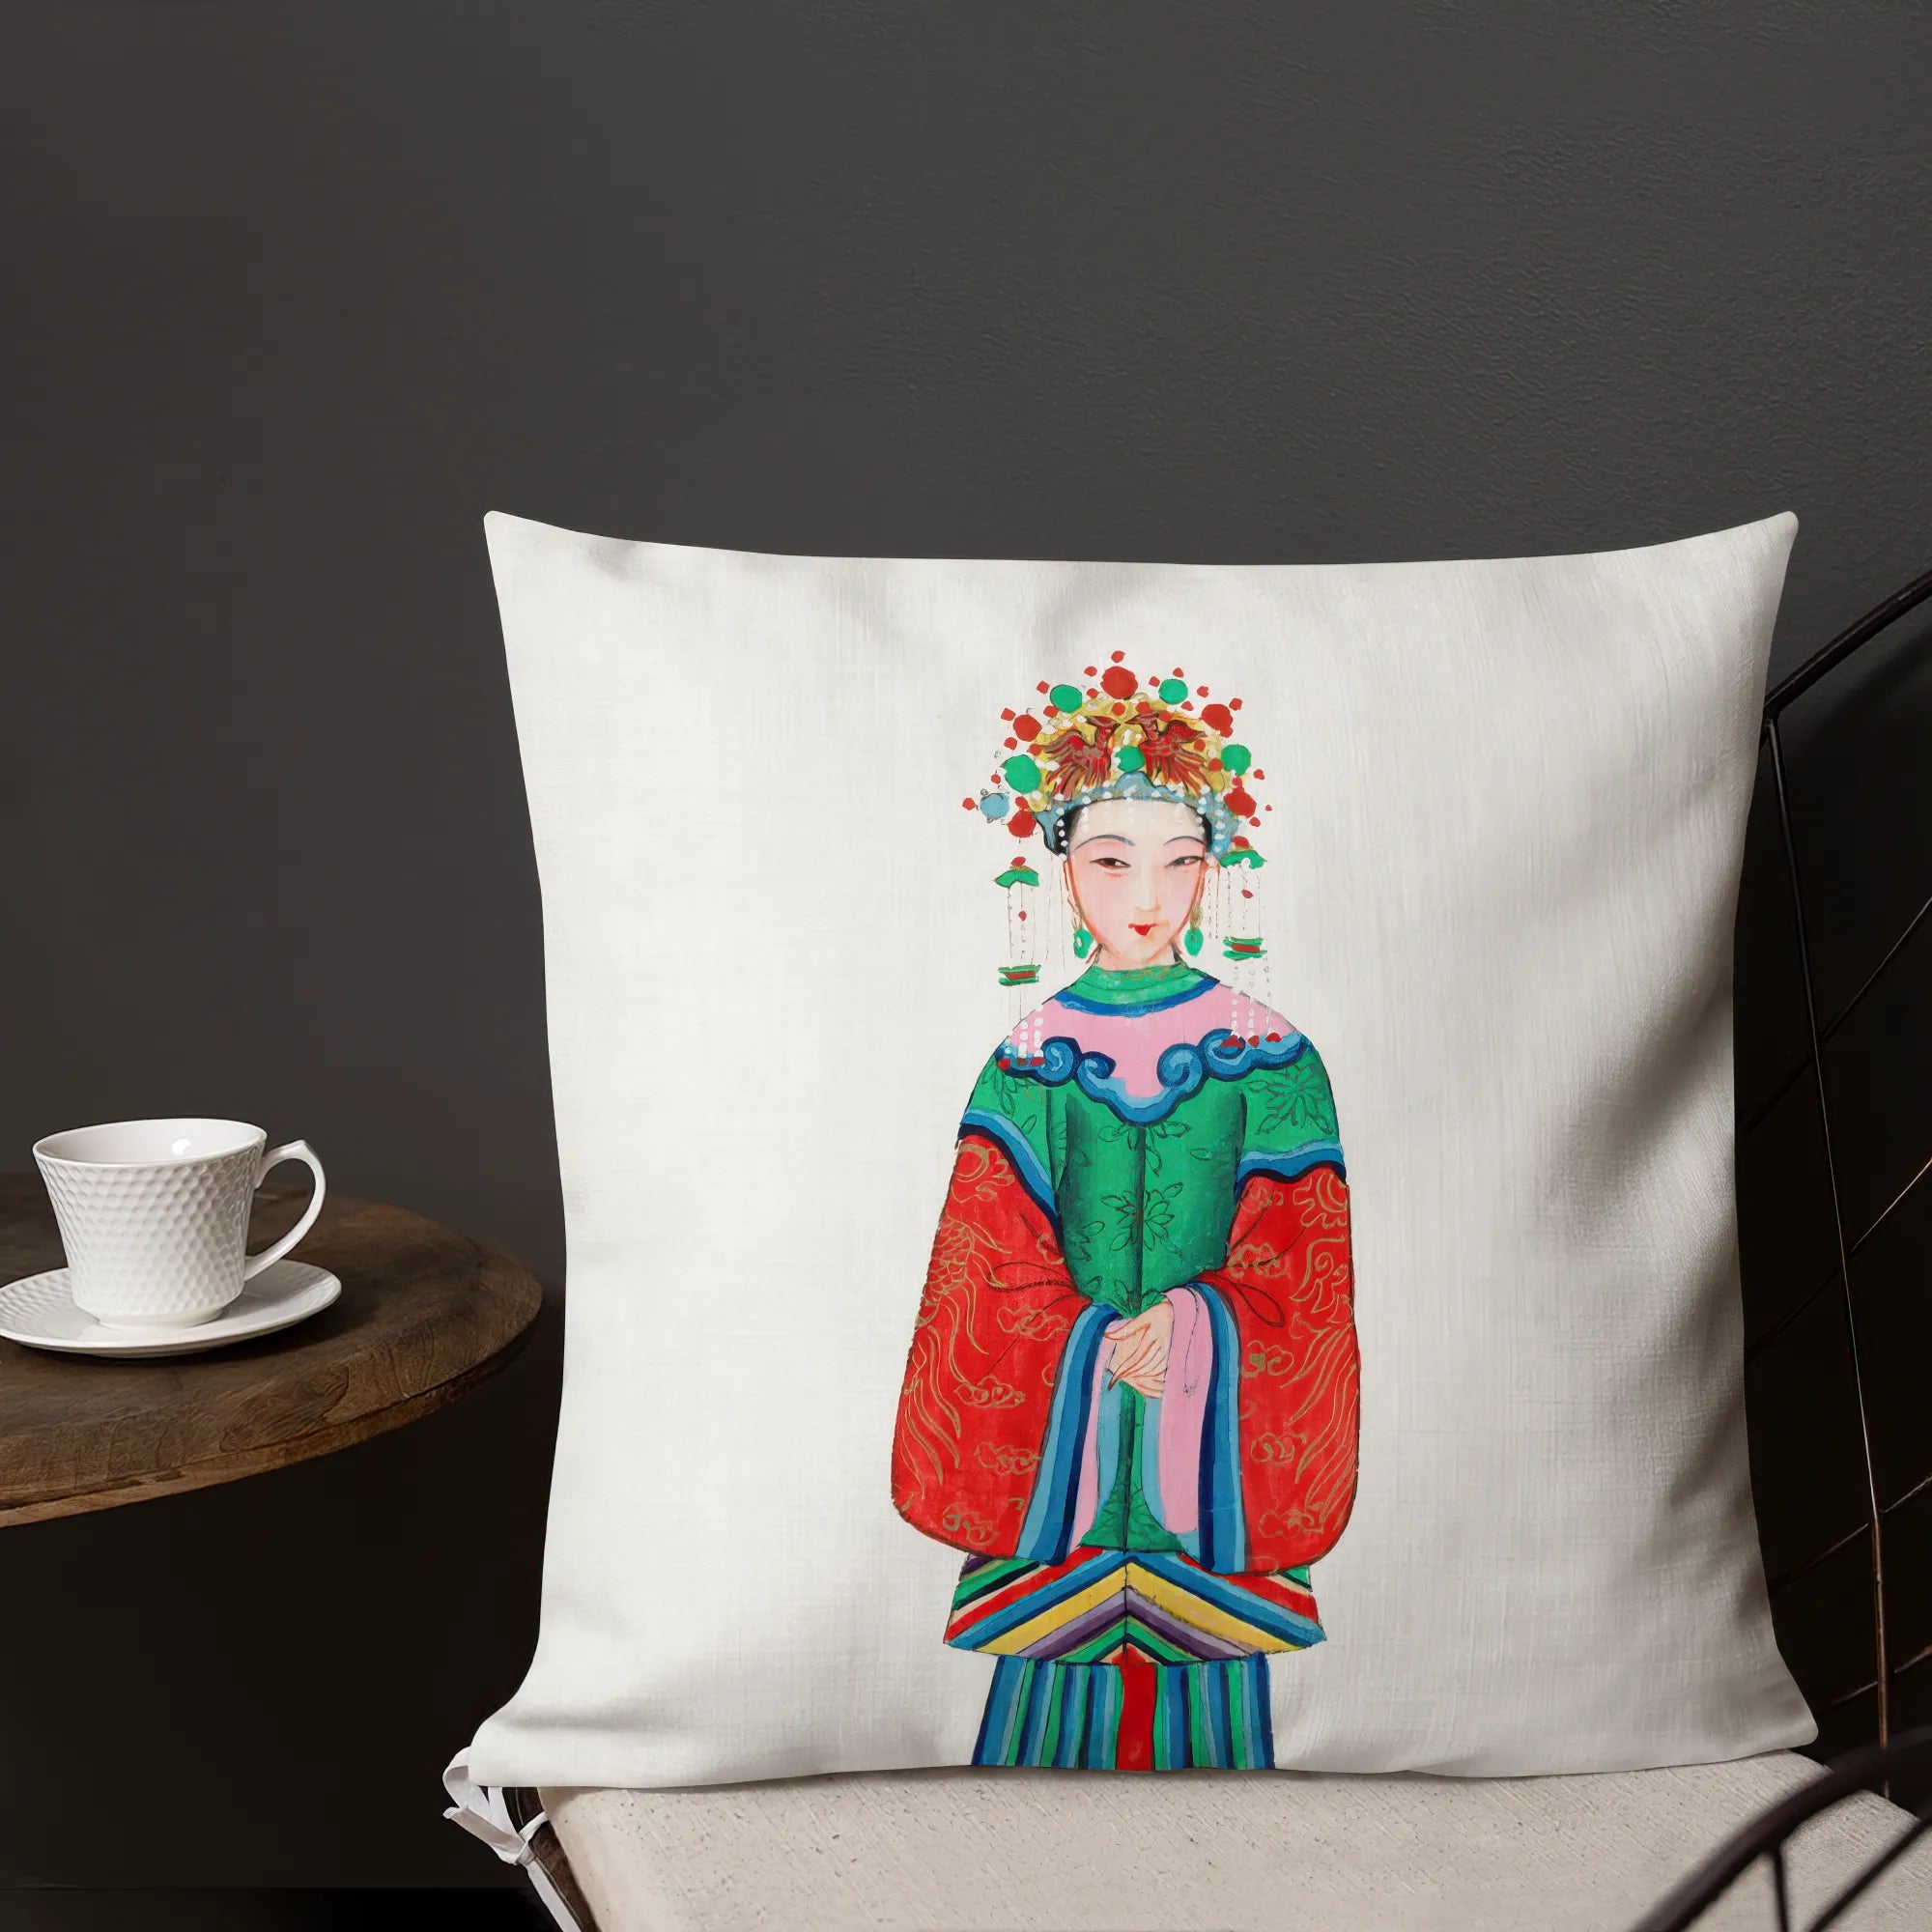 Chinese Imperial Princess Cushion - Throw Pillows - Aesthetic Art